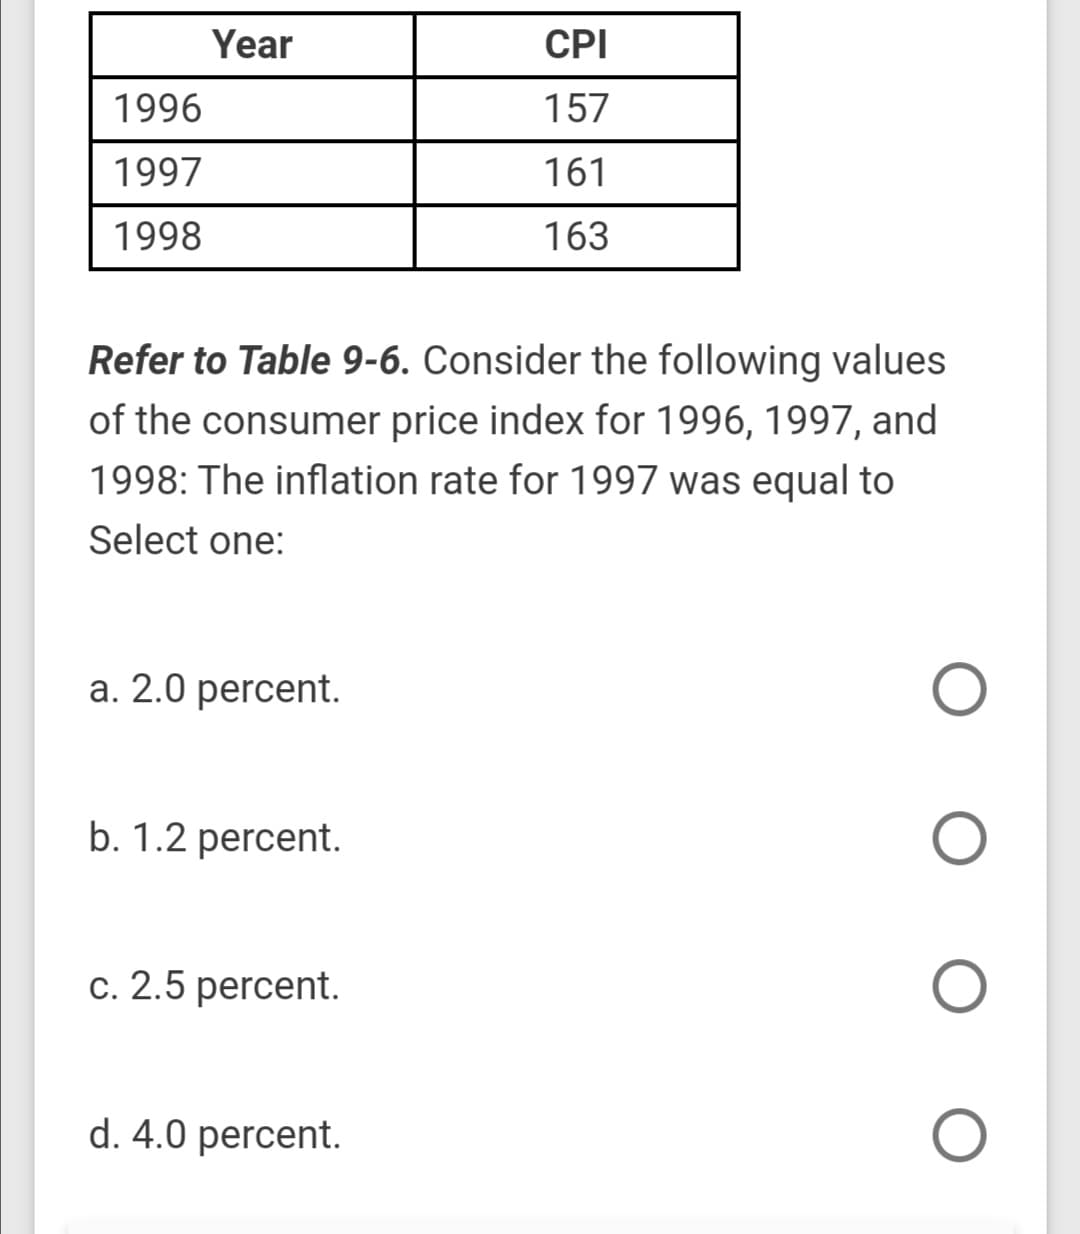 Year
CPI
1996
157
1997
161
1998
163
Refer to Table 9-6. Consider the following values
of the consumer price index for 1996, 1997, and
1998: The inflation rate for 1997 was equal to
Select one:
a. 2.0 percent.
b. 1.2 percent.
c. 2.5 percent.
d. 4.0 percent.
